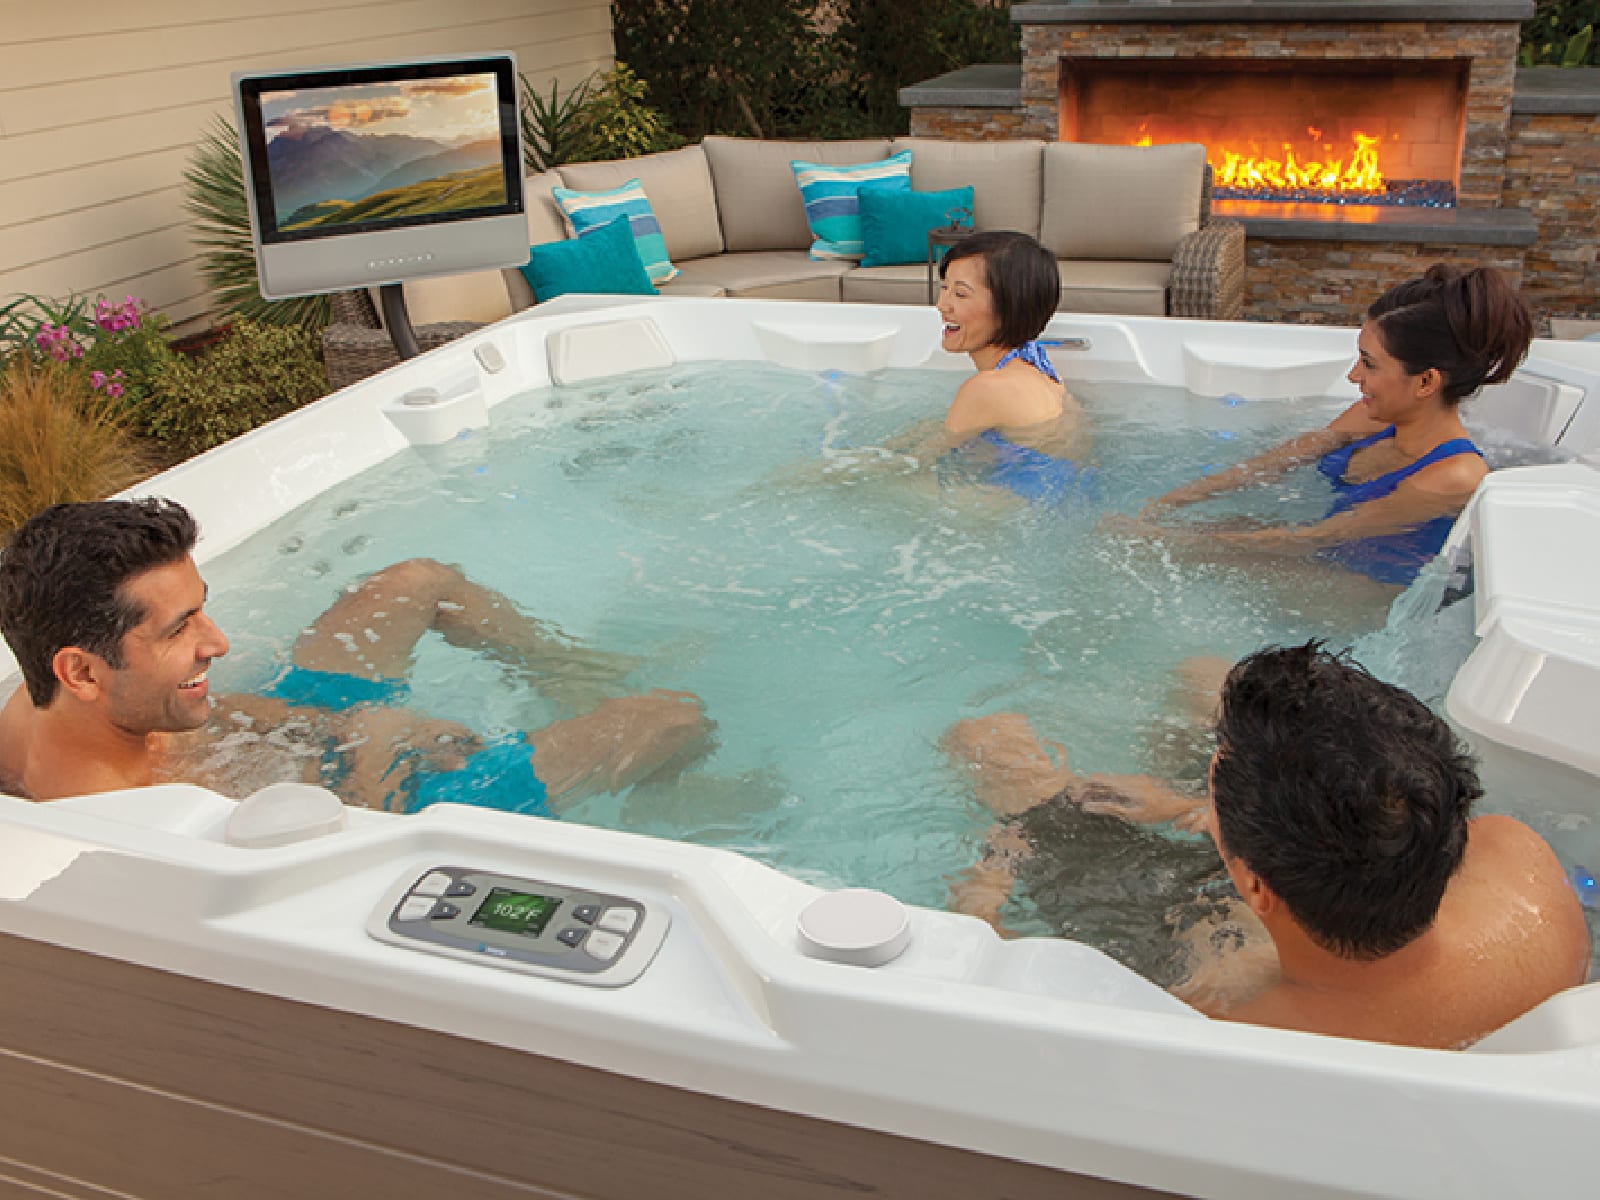 8 blockbuster hits to watch while soaking in your hot tub